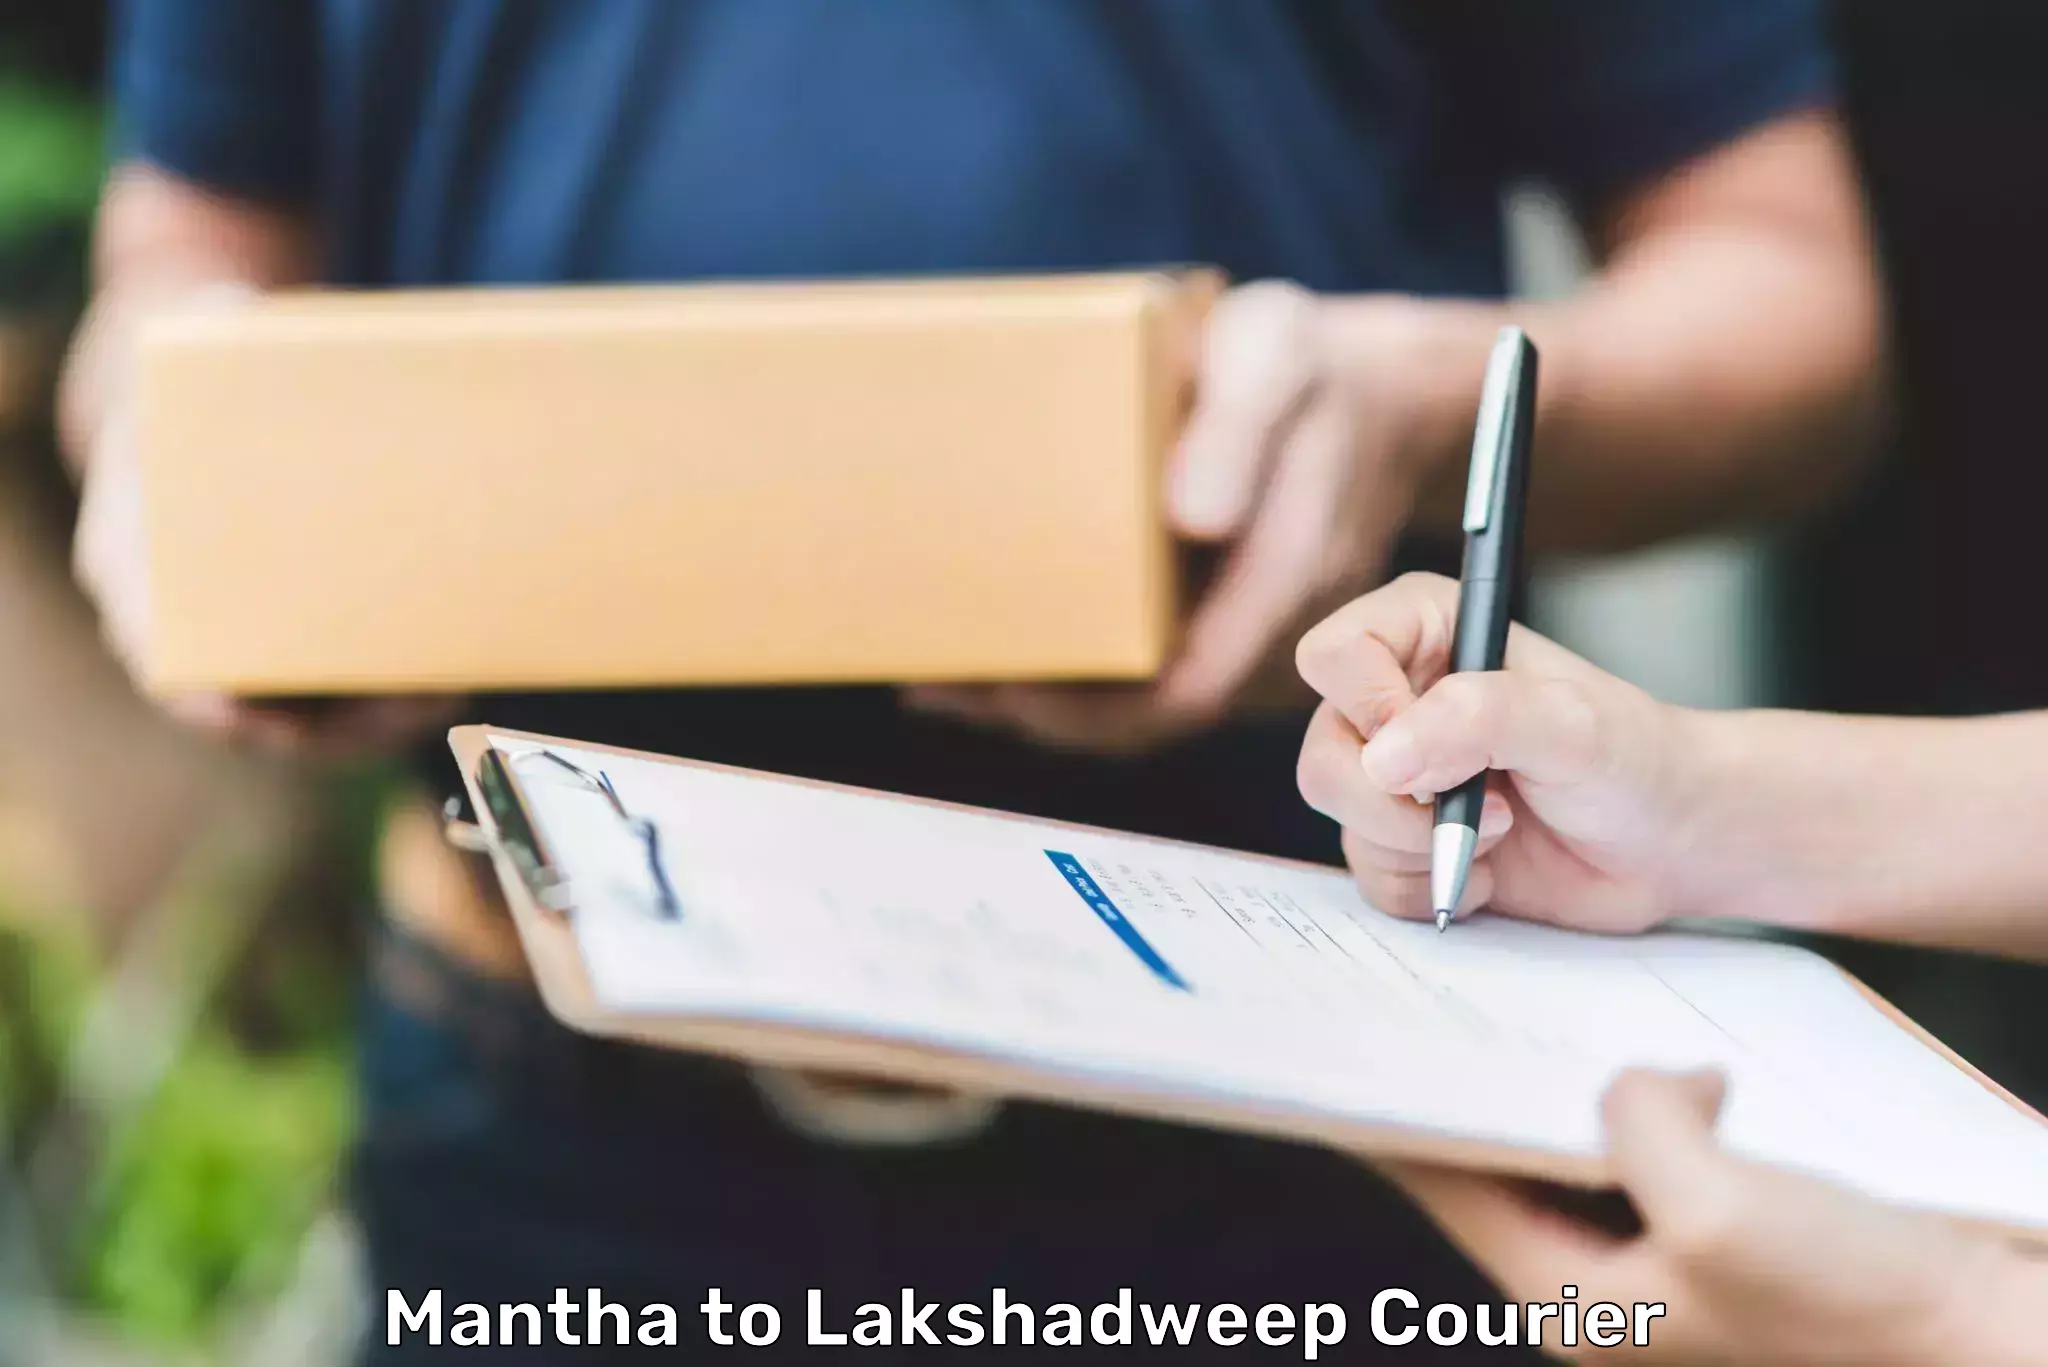 Courier service efficiency in Mantha to Lakshadweep